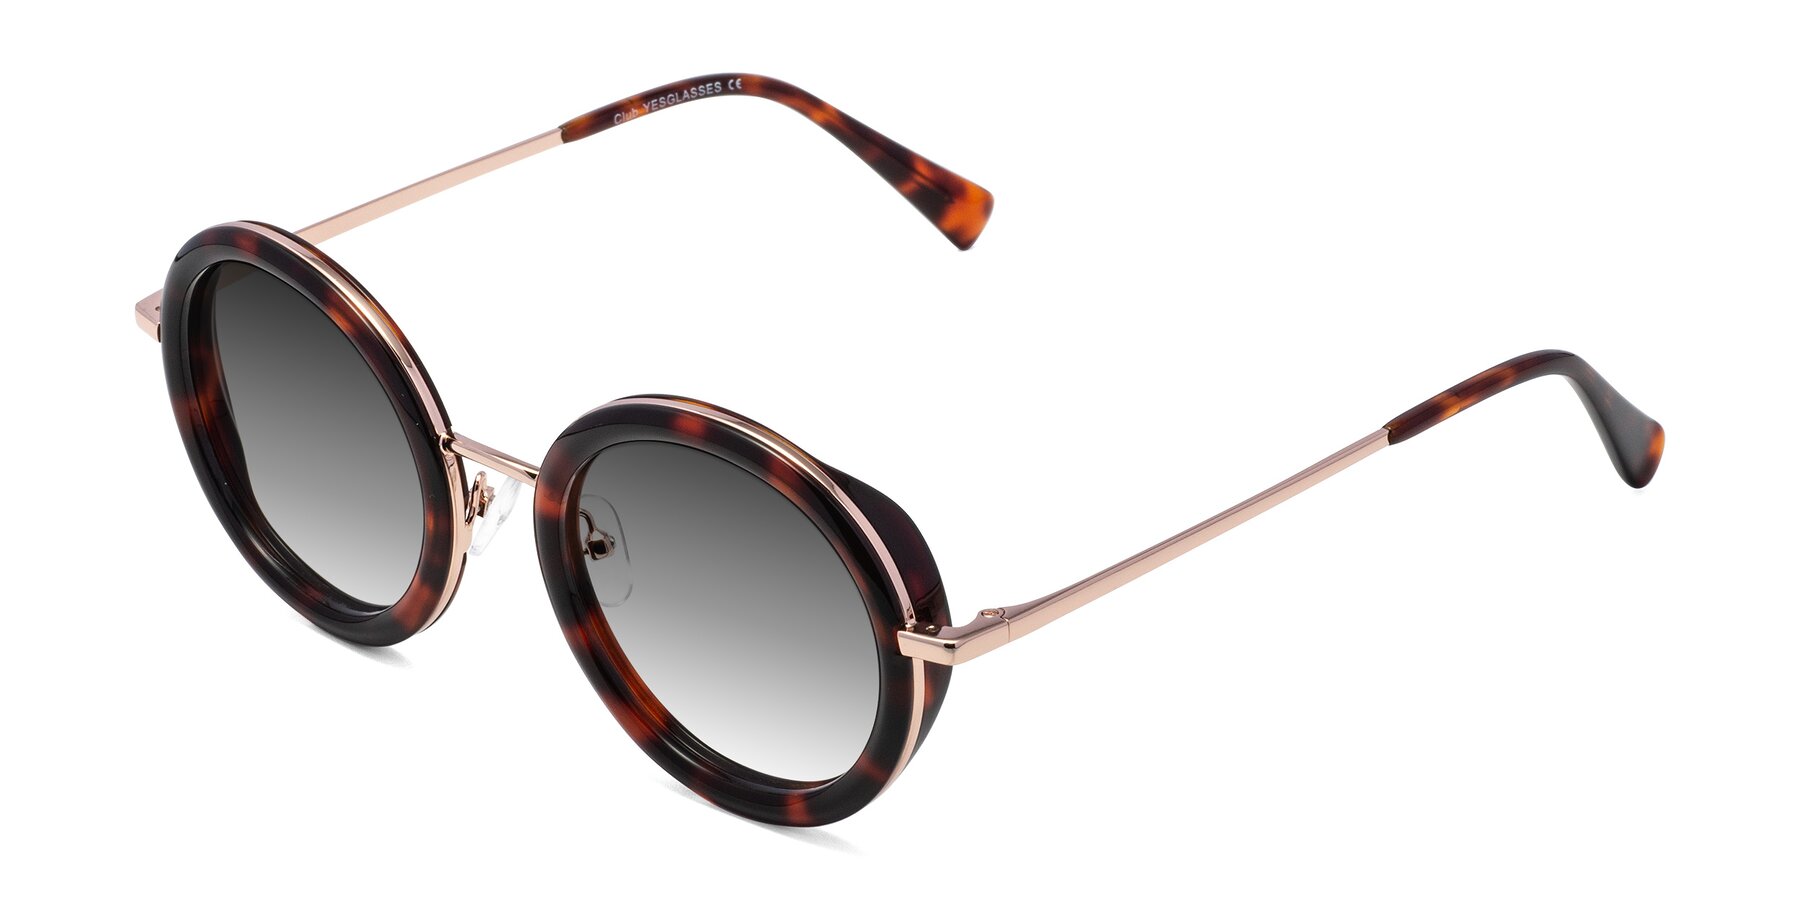 Angle of Club in Tortoise-Rose Gold with Gray Gradient Lenses